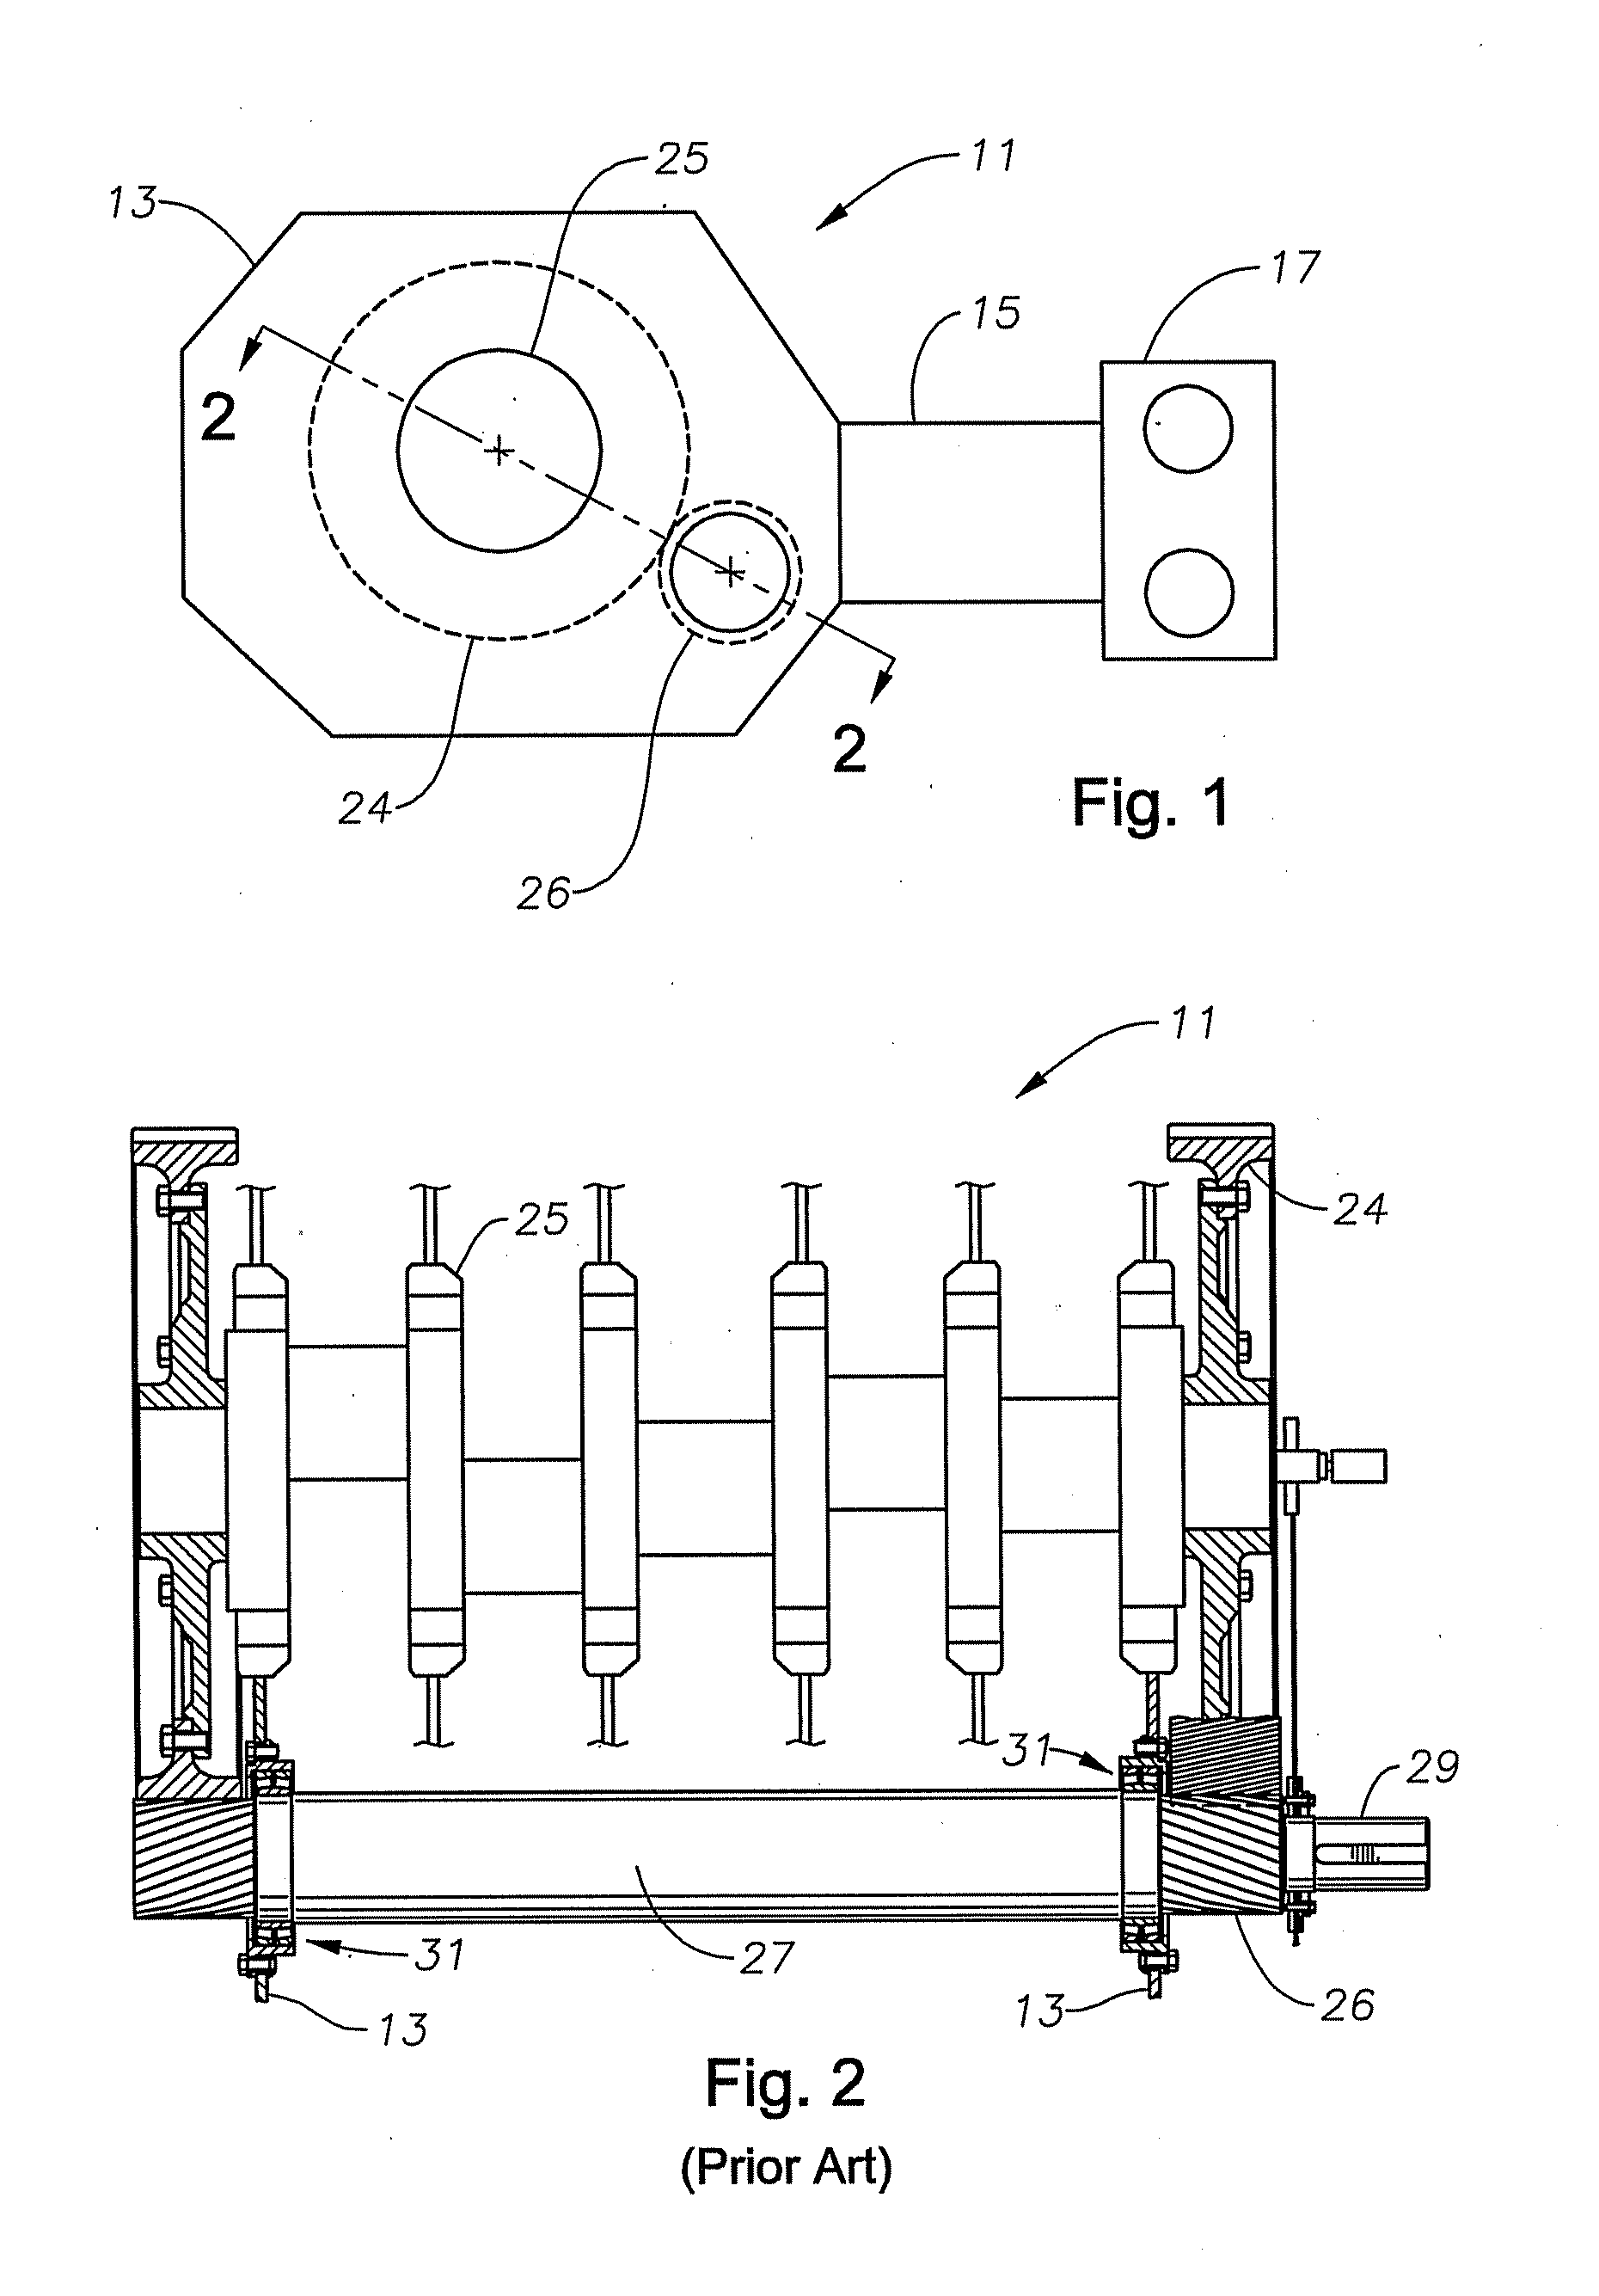 Floating Pinion Bearing for a Reciprocating Pump